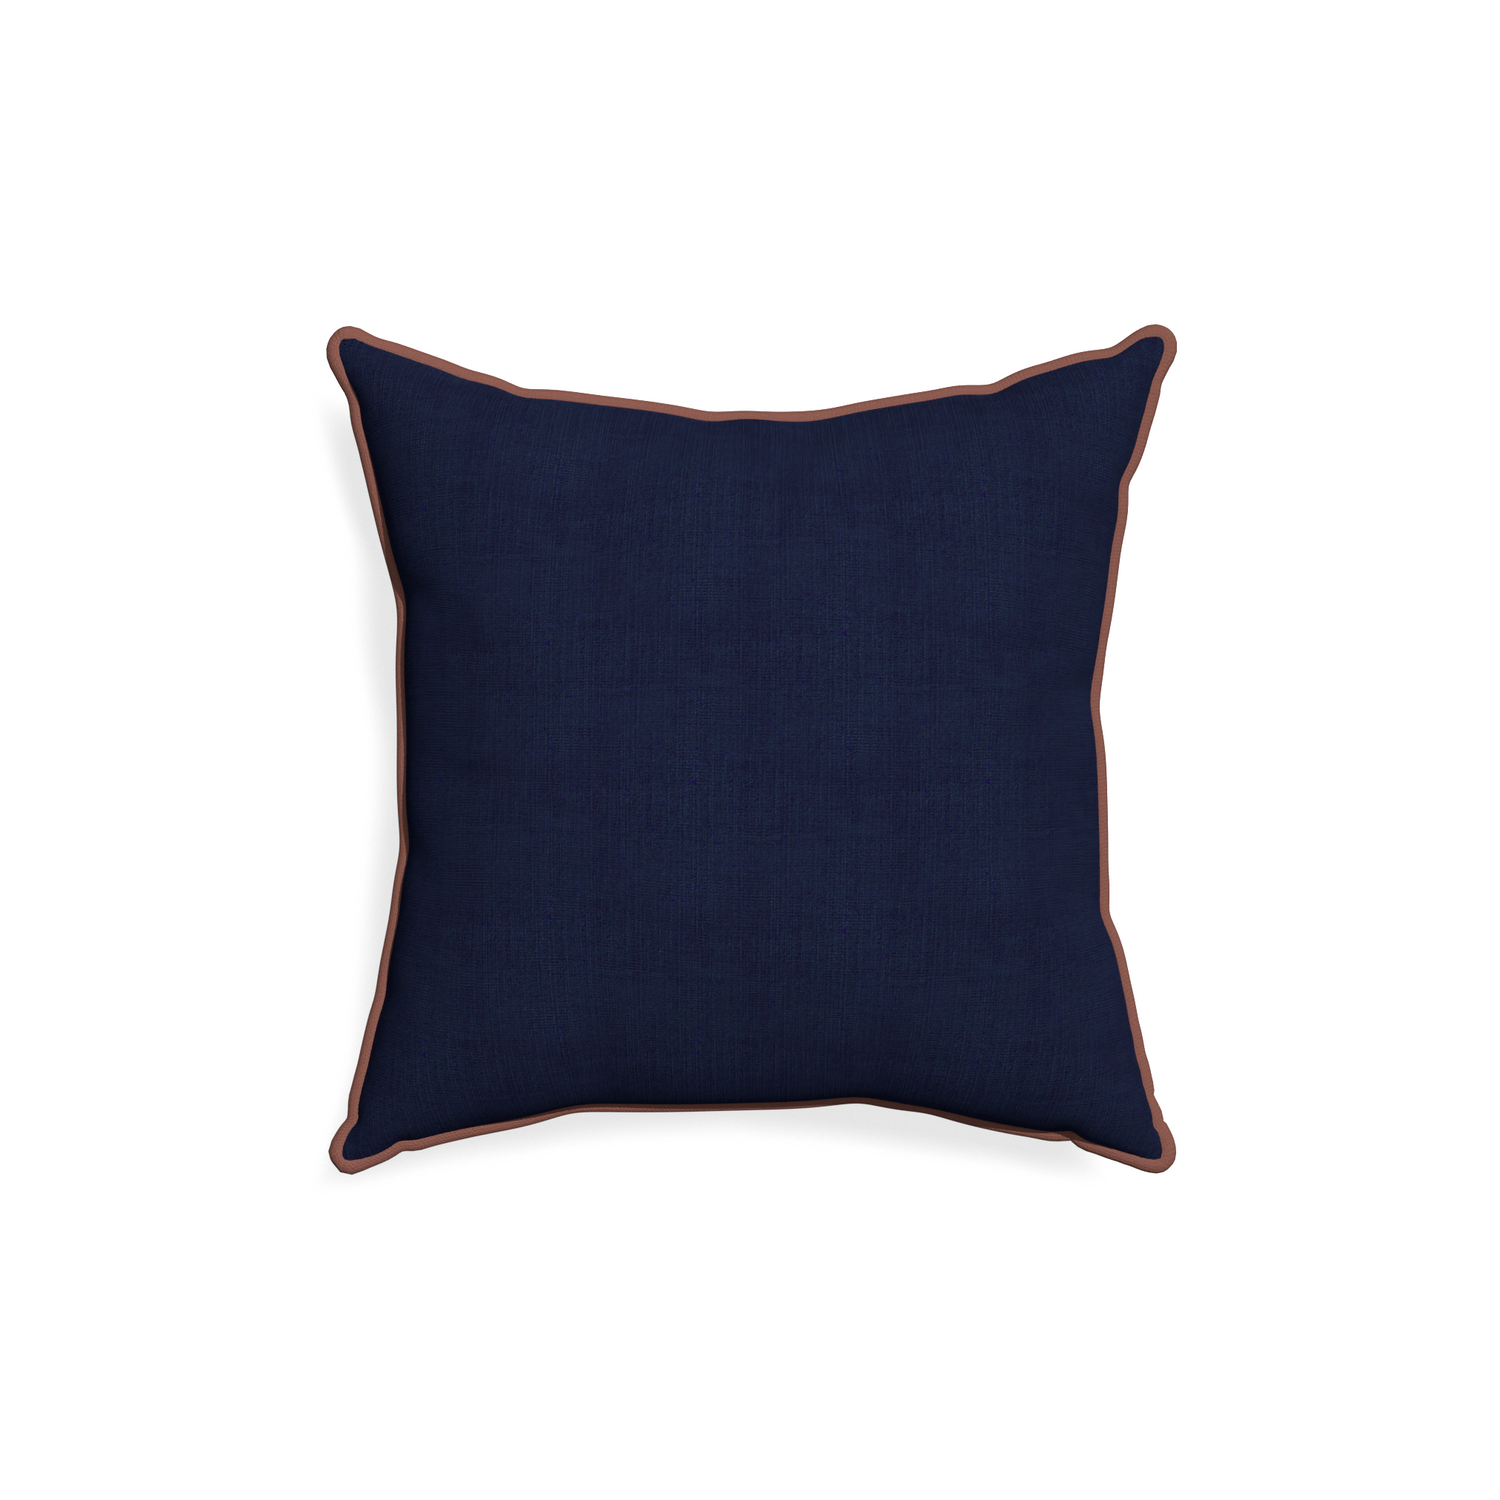 18-square midnight custom navy bluepillow with w piping on white background